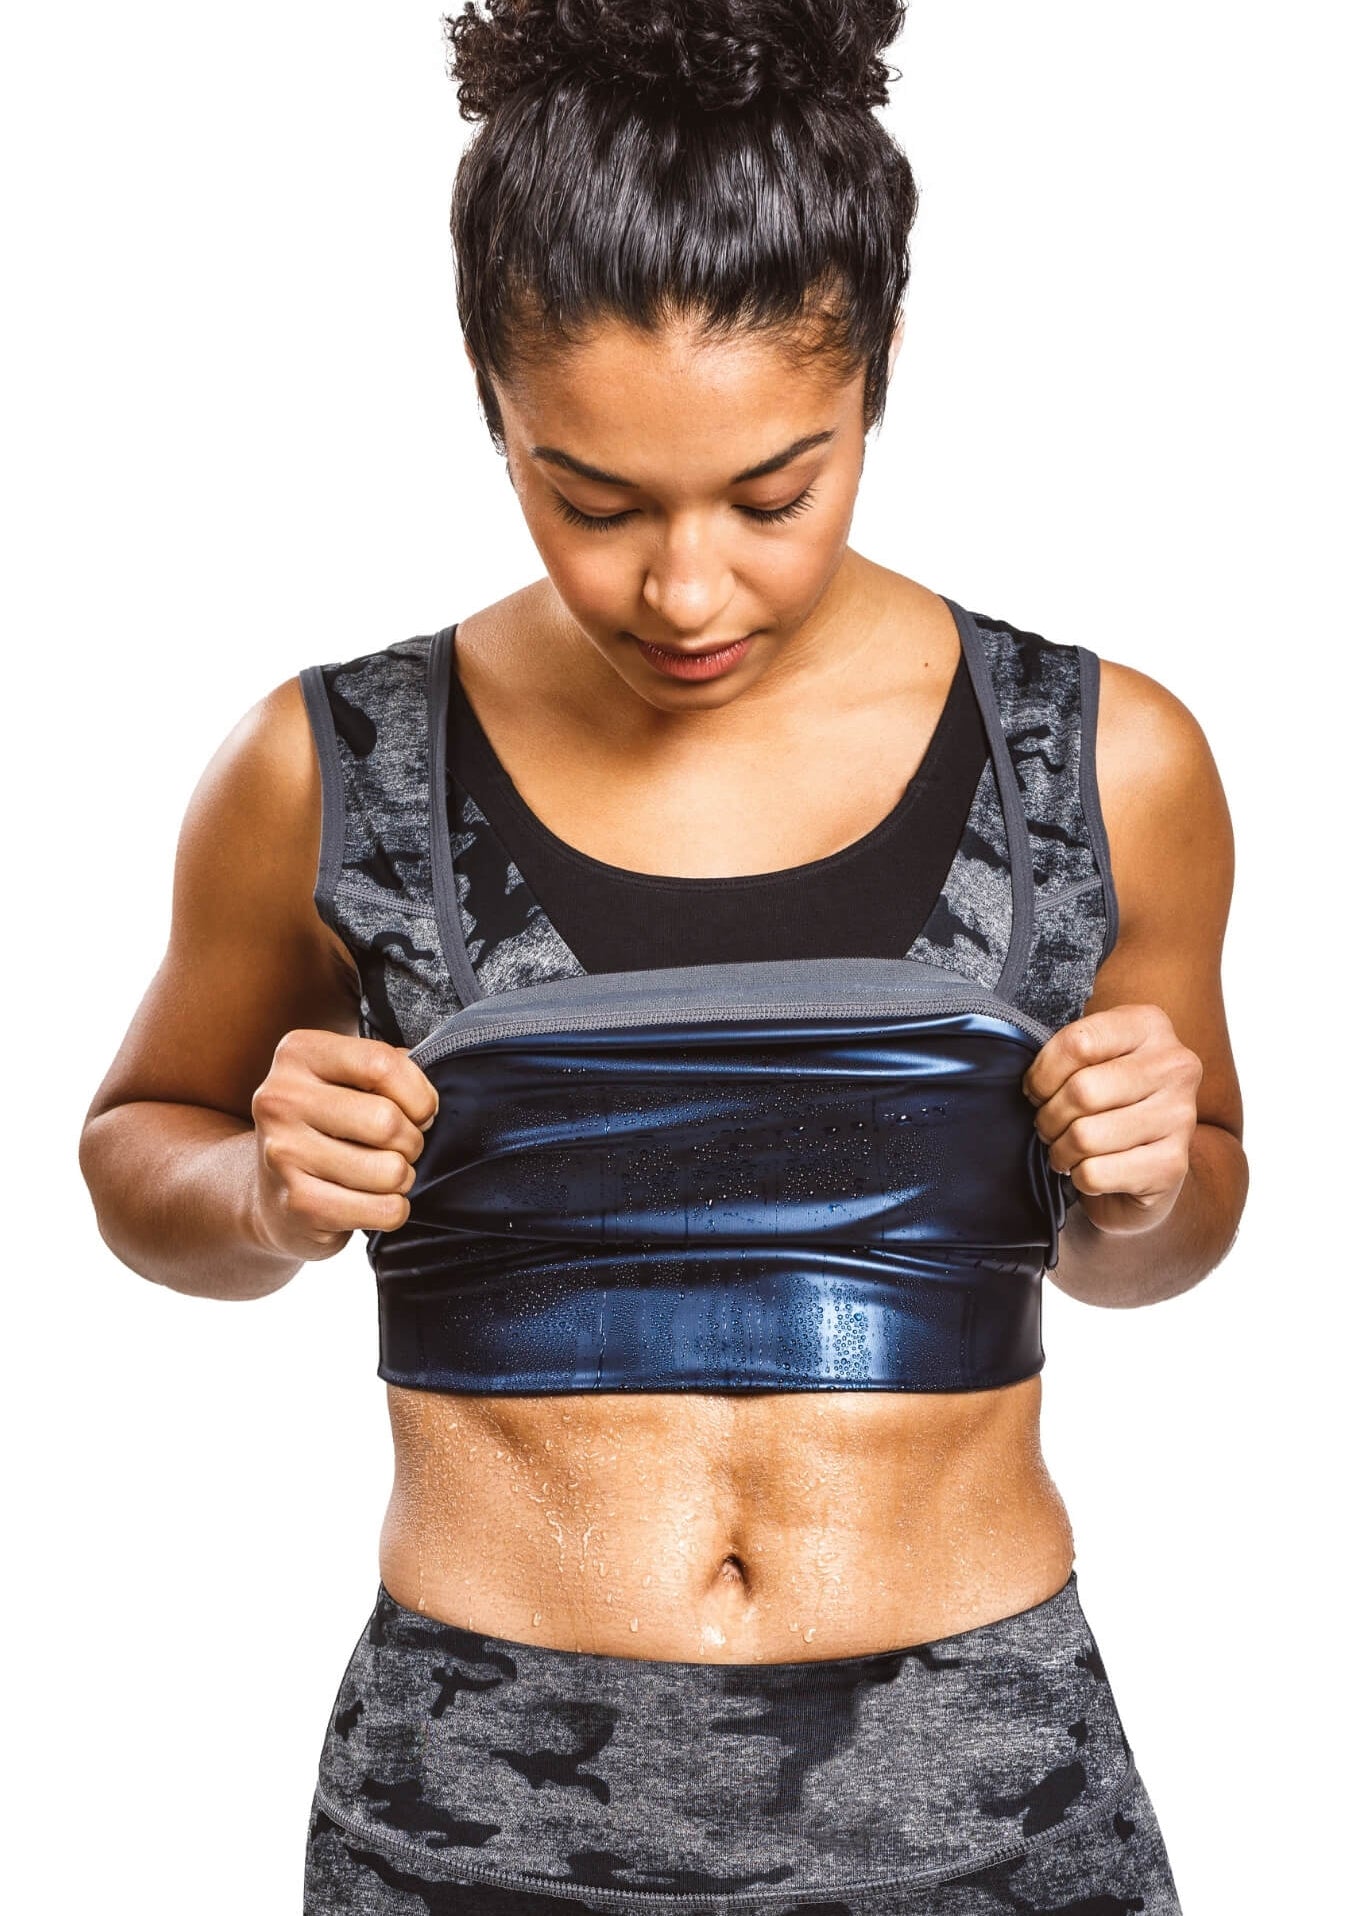 Buy FirstFit Women's Thermo Sweat Shaper for Workout, Fitness, Gym